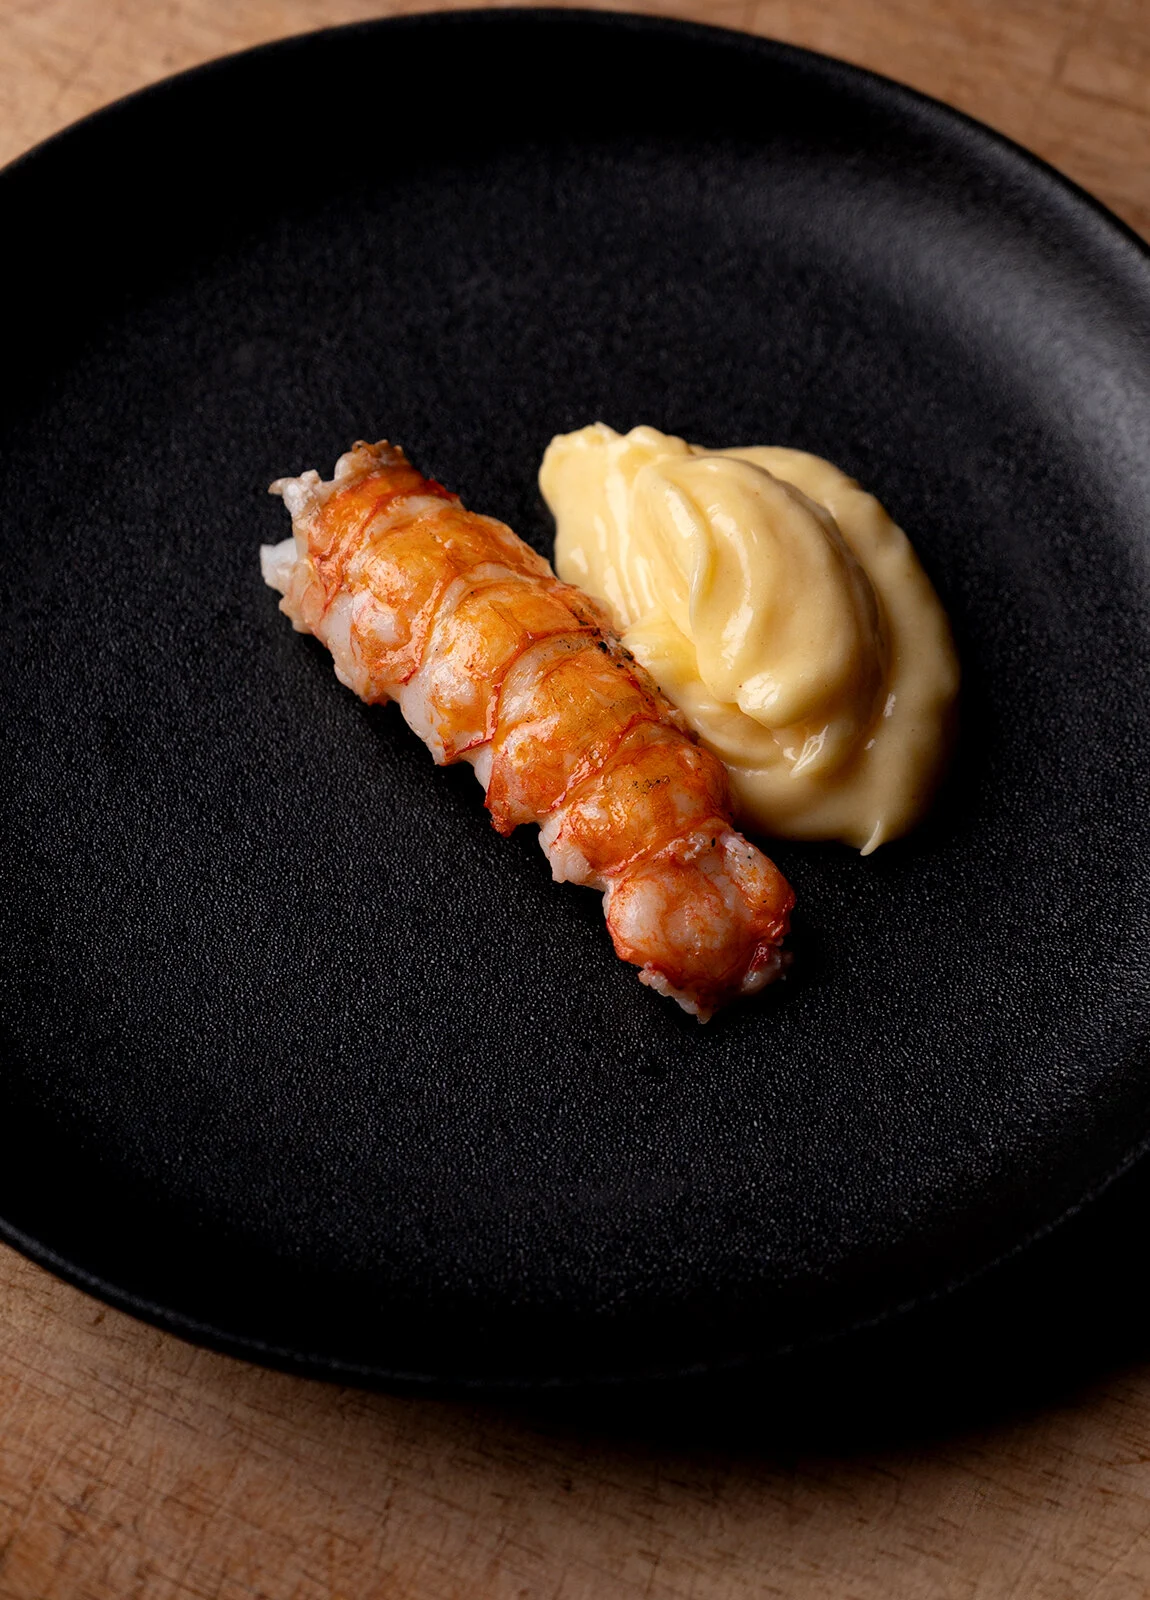 Langoustine with Brown Butter Emulsion